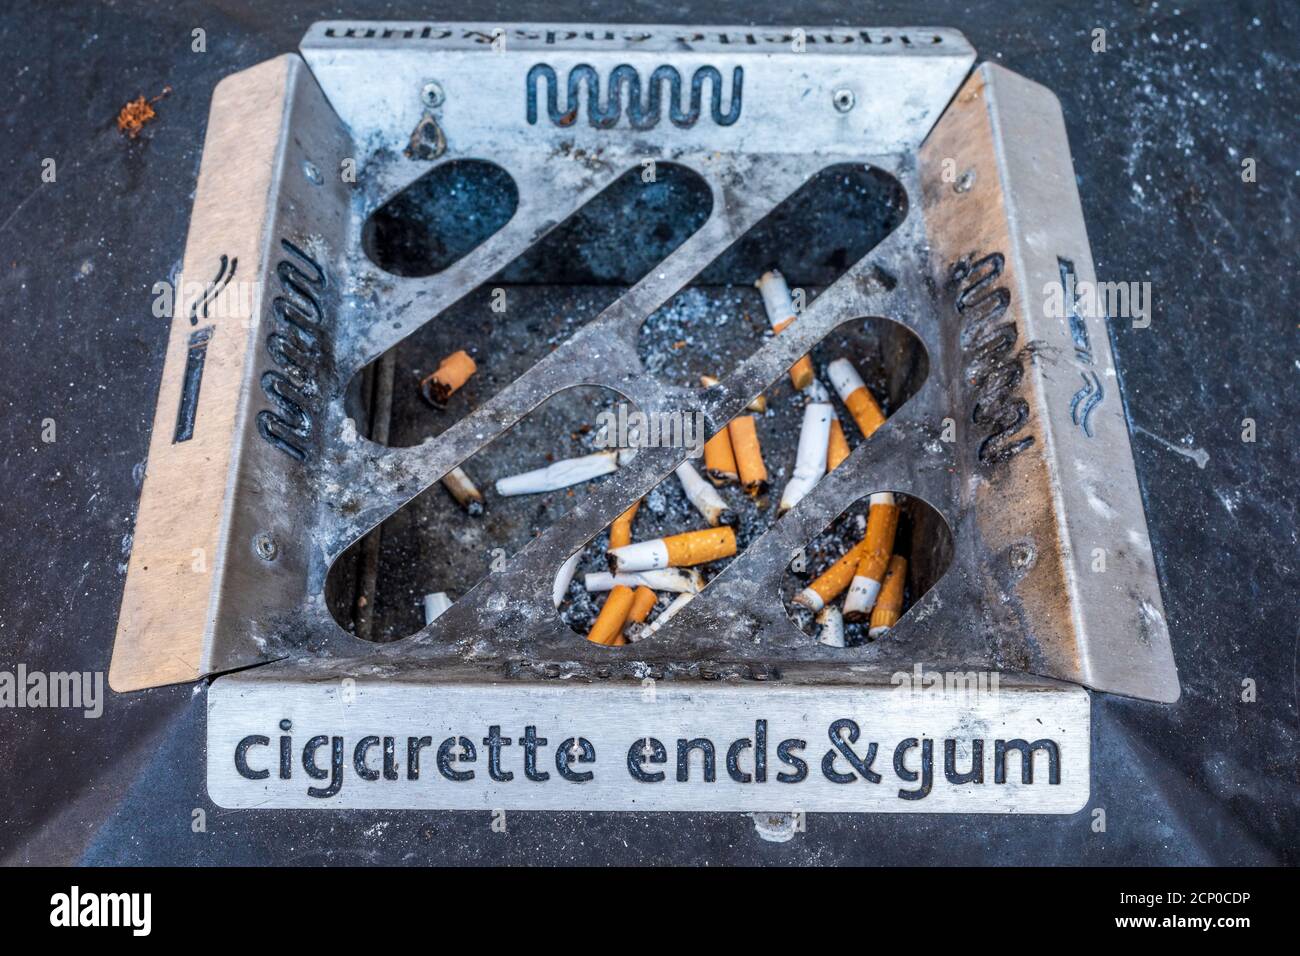 Cigarette Ends and Gum ashtray - Cigarette Ends & Gum tray on a waste bin. Stock Photo